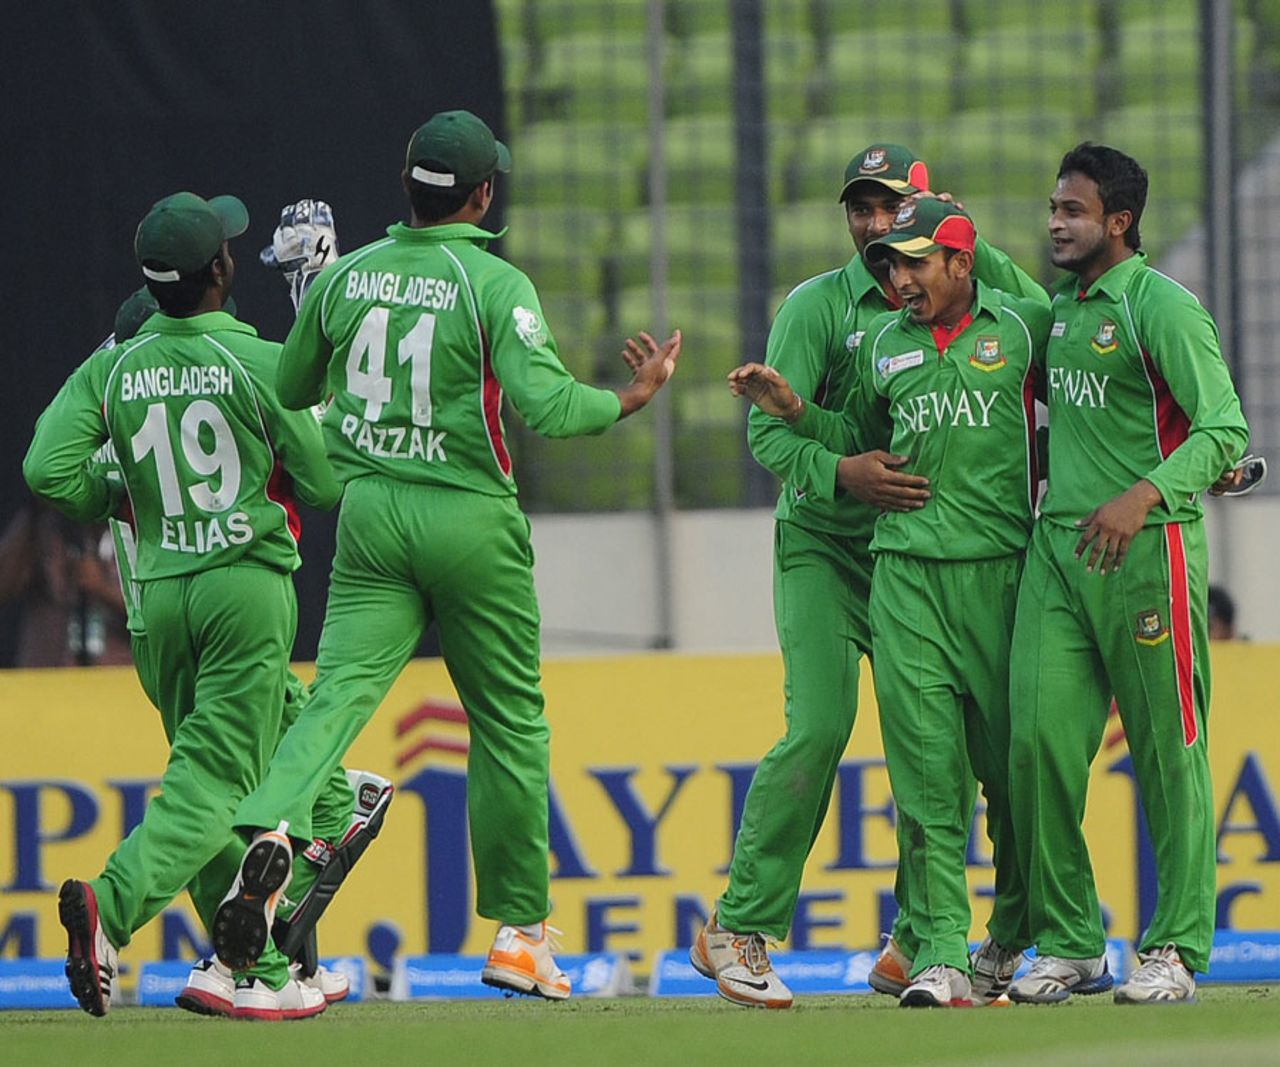 Nasir Hossain is surrounded by team-mates after an impressive catch, Bangladesh v Pakistan, Asia Cup final, Mirpur, March 22, 2012